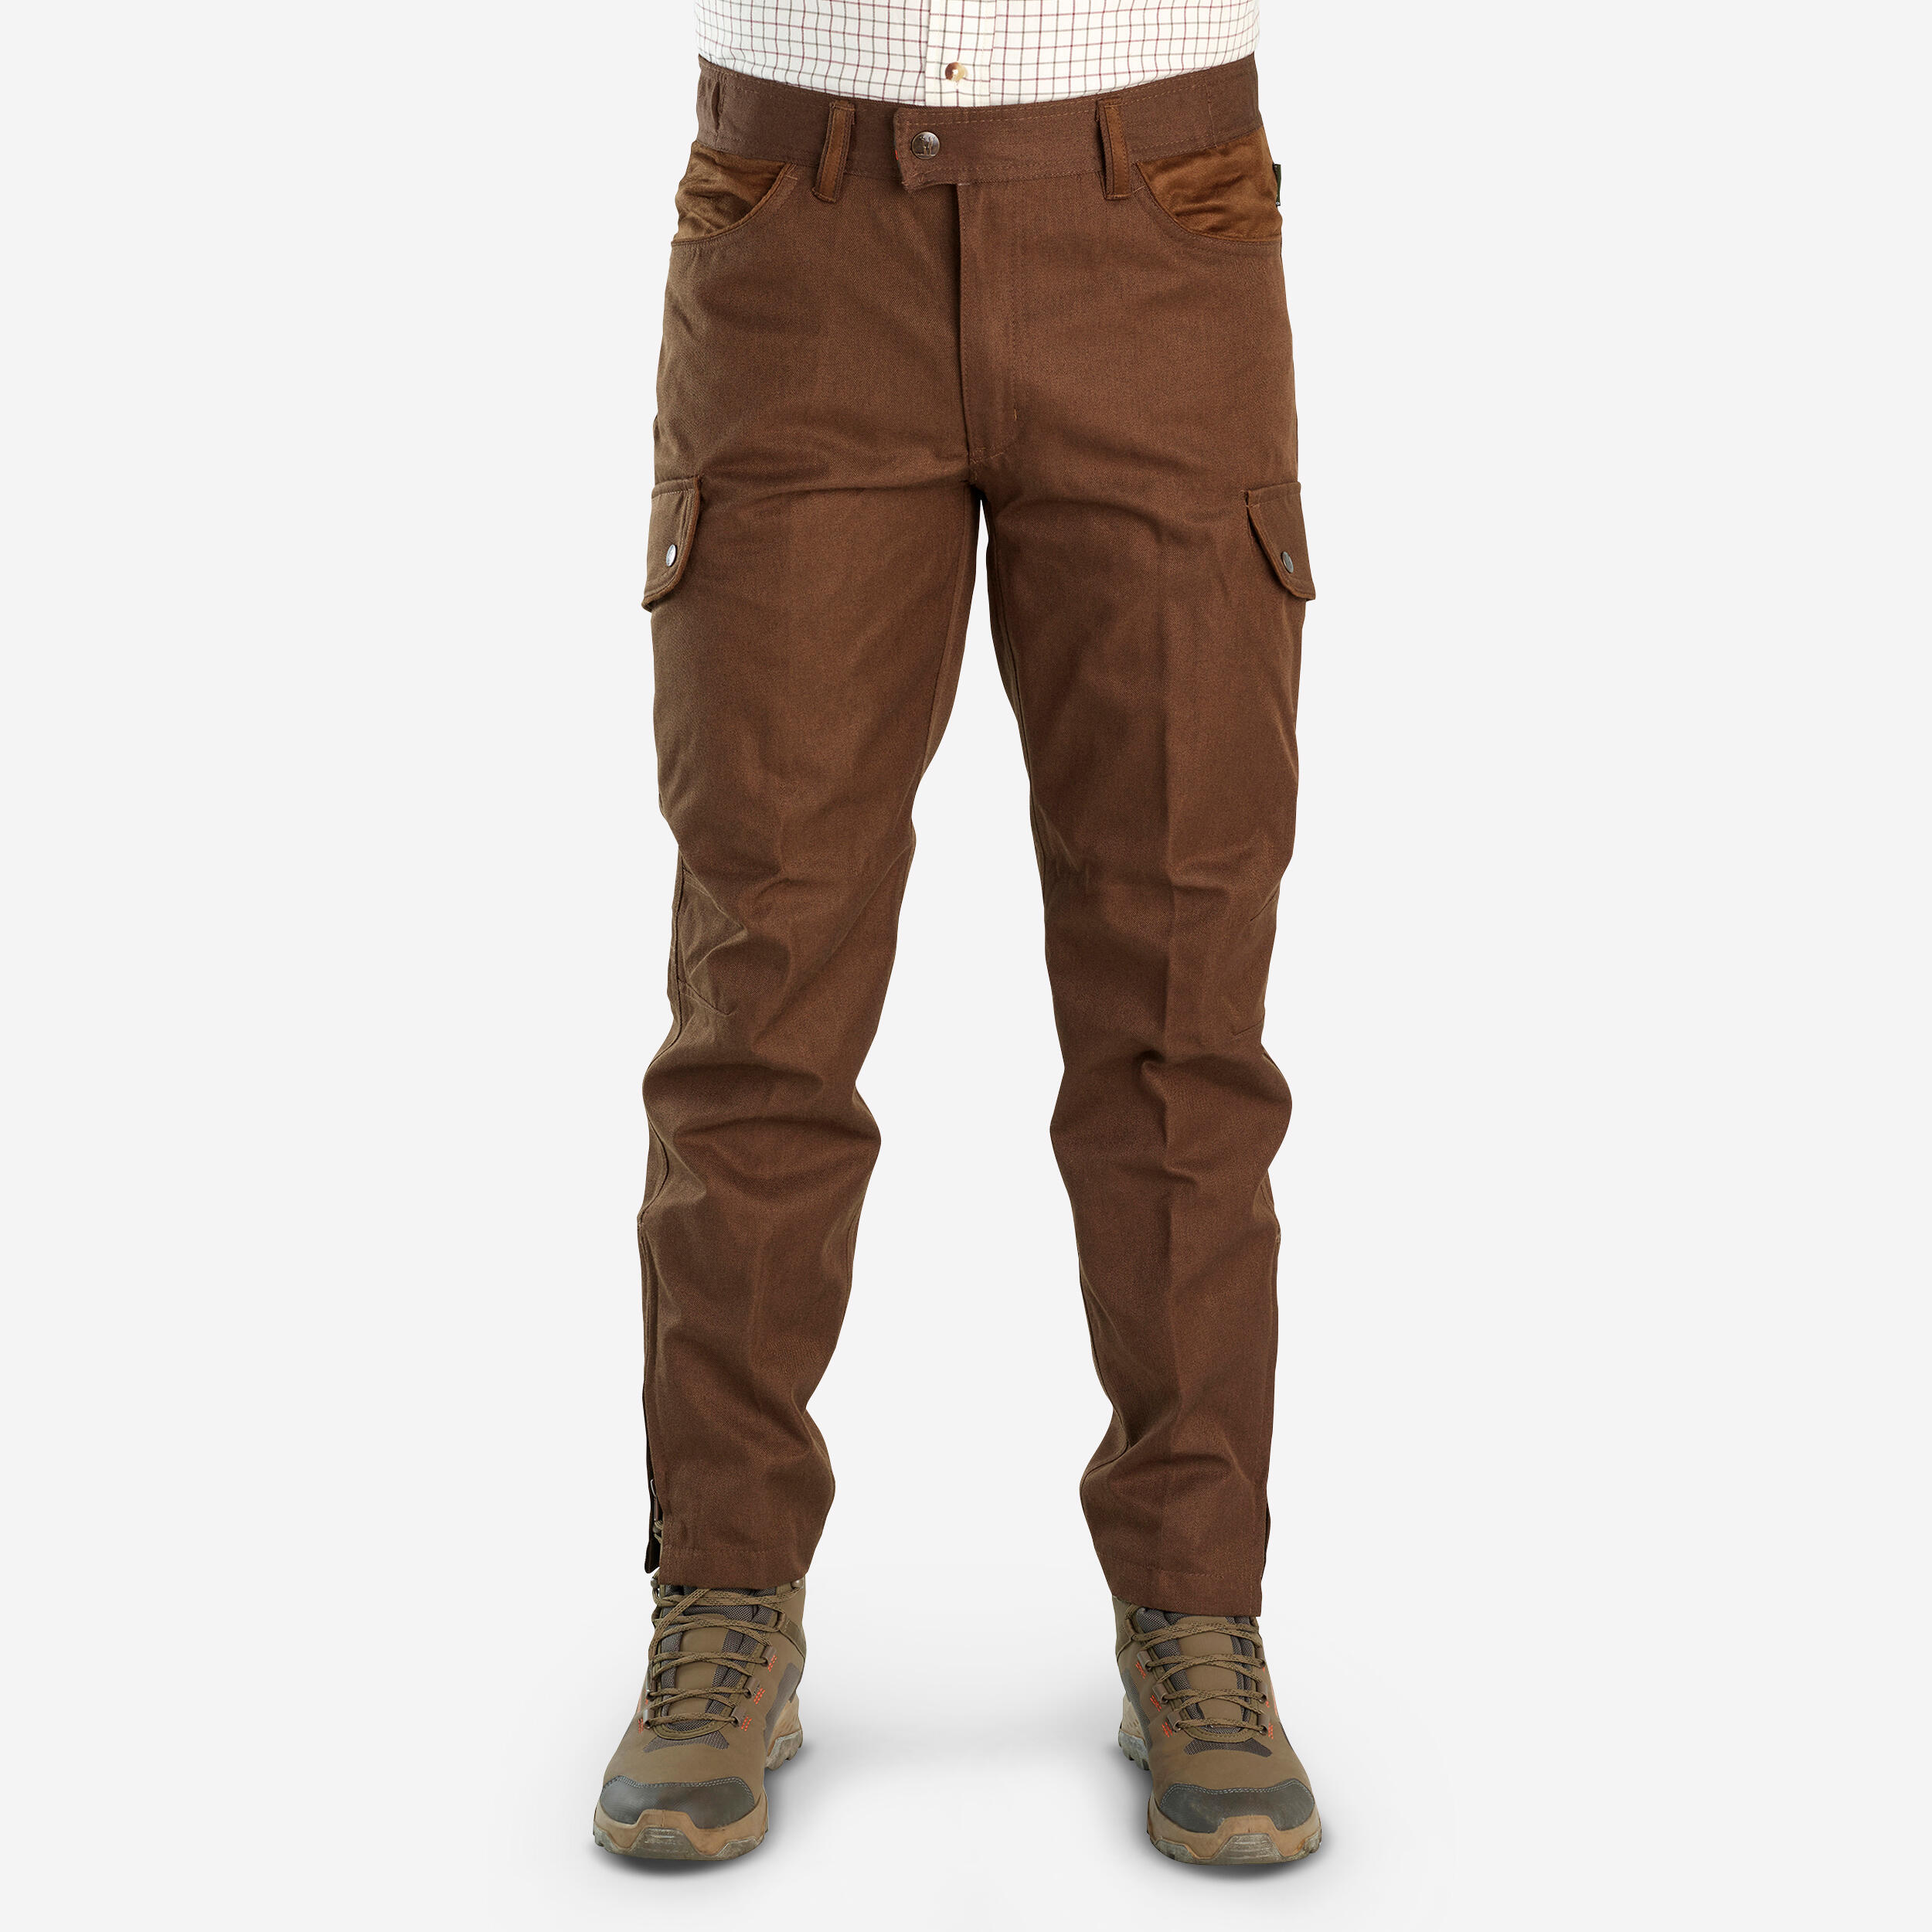 Percussion Sologne Warm Waterproof Firing Trousers